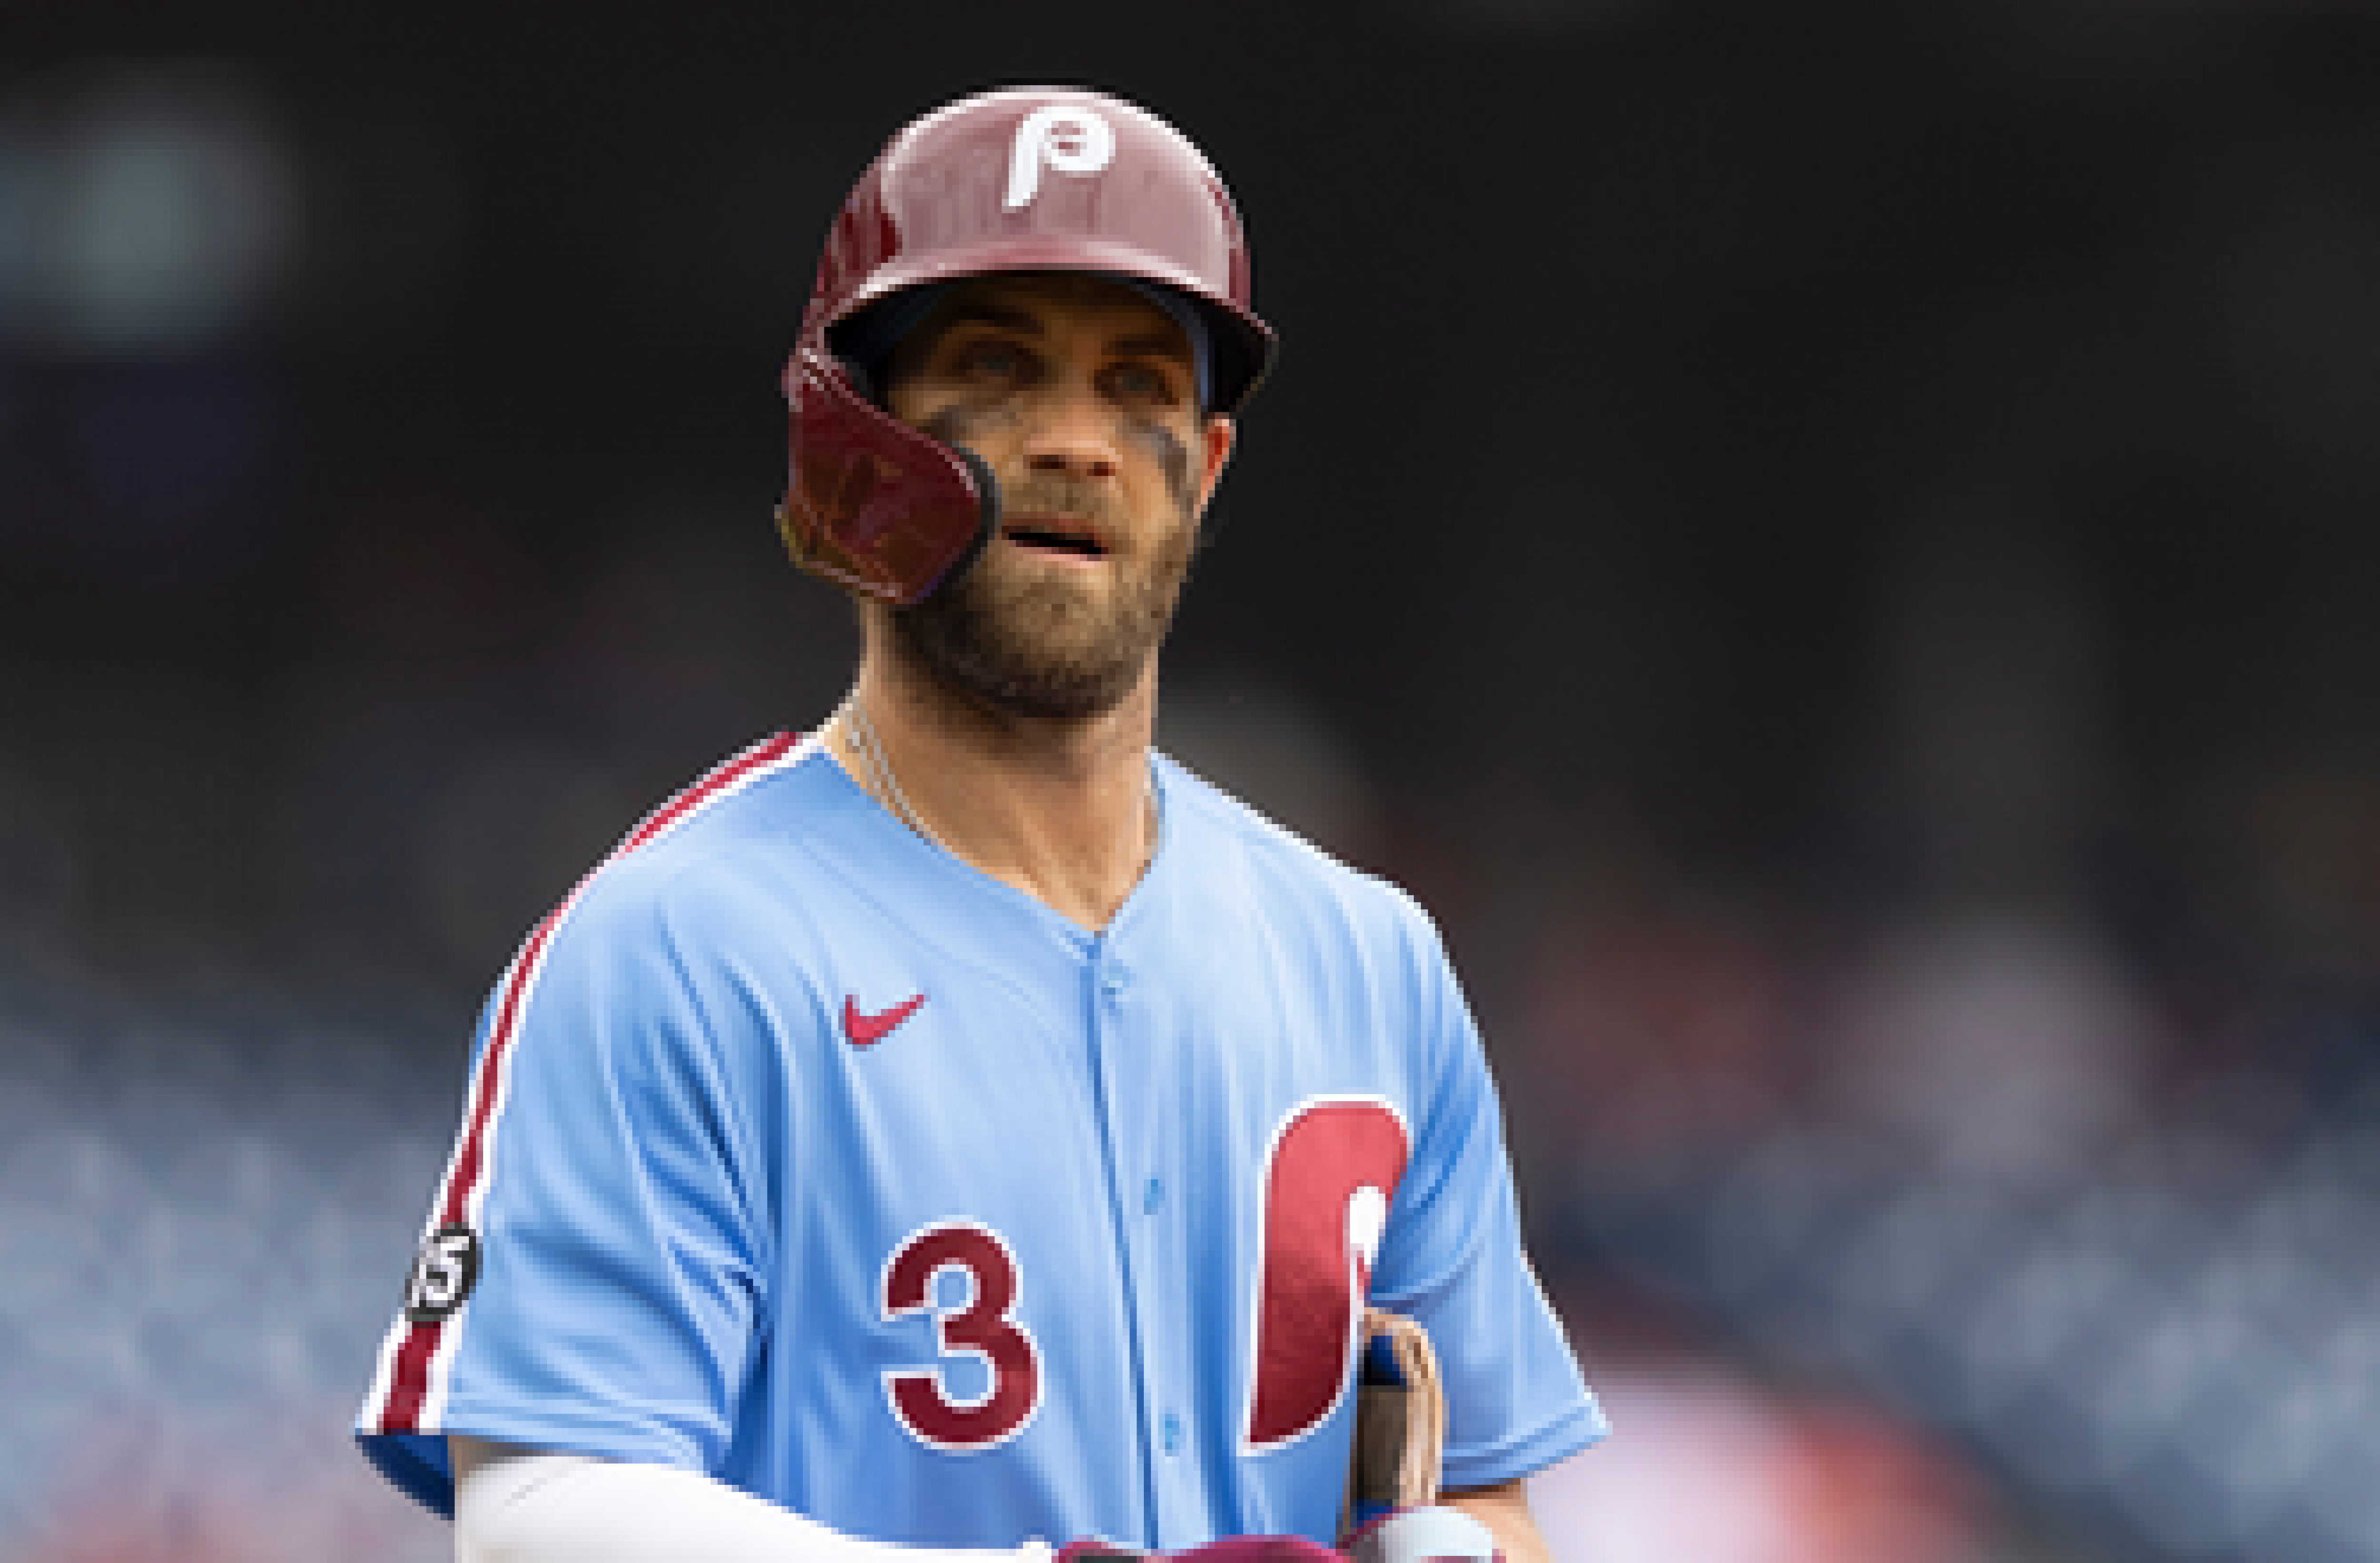 Eric Karros, Dontrelle Willis on how the Phillies can end their postseason drought